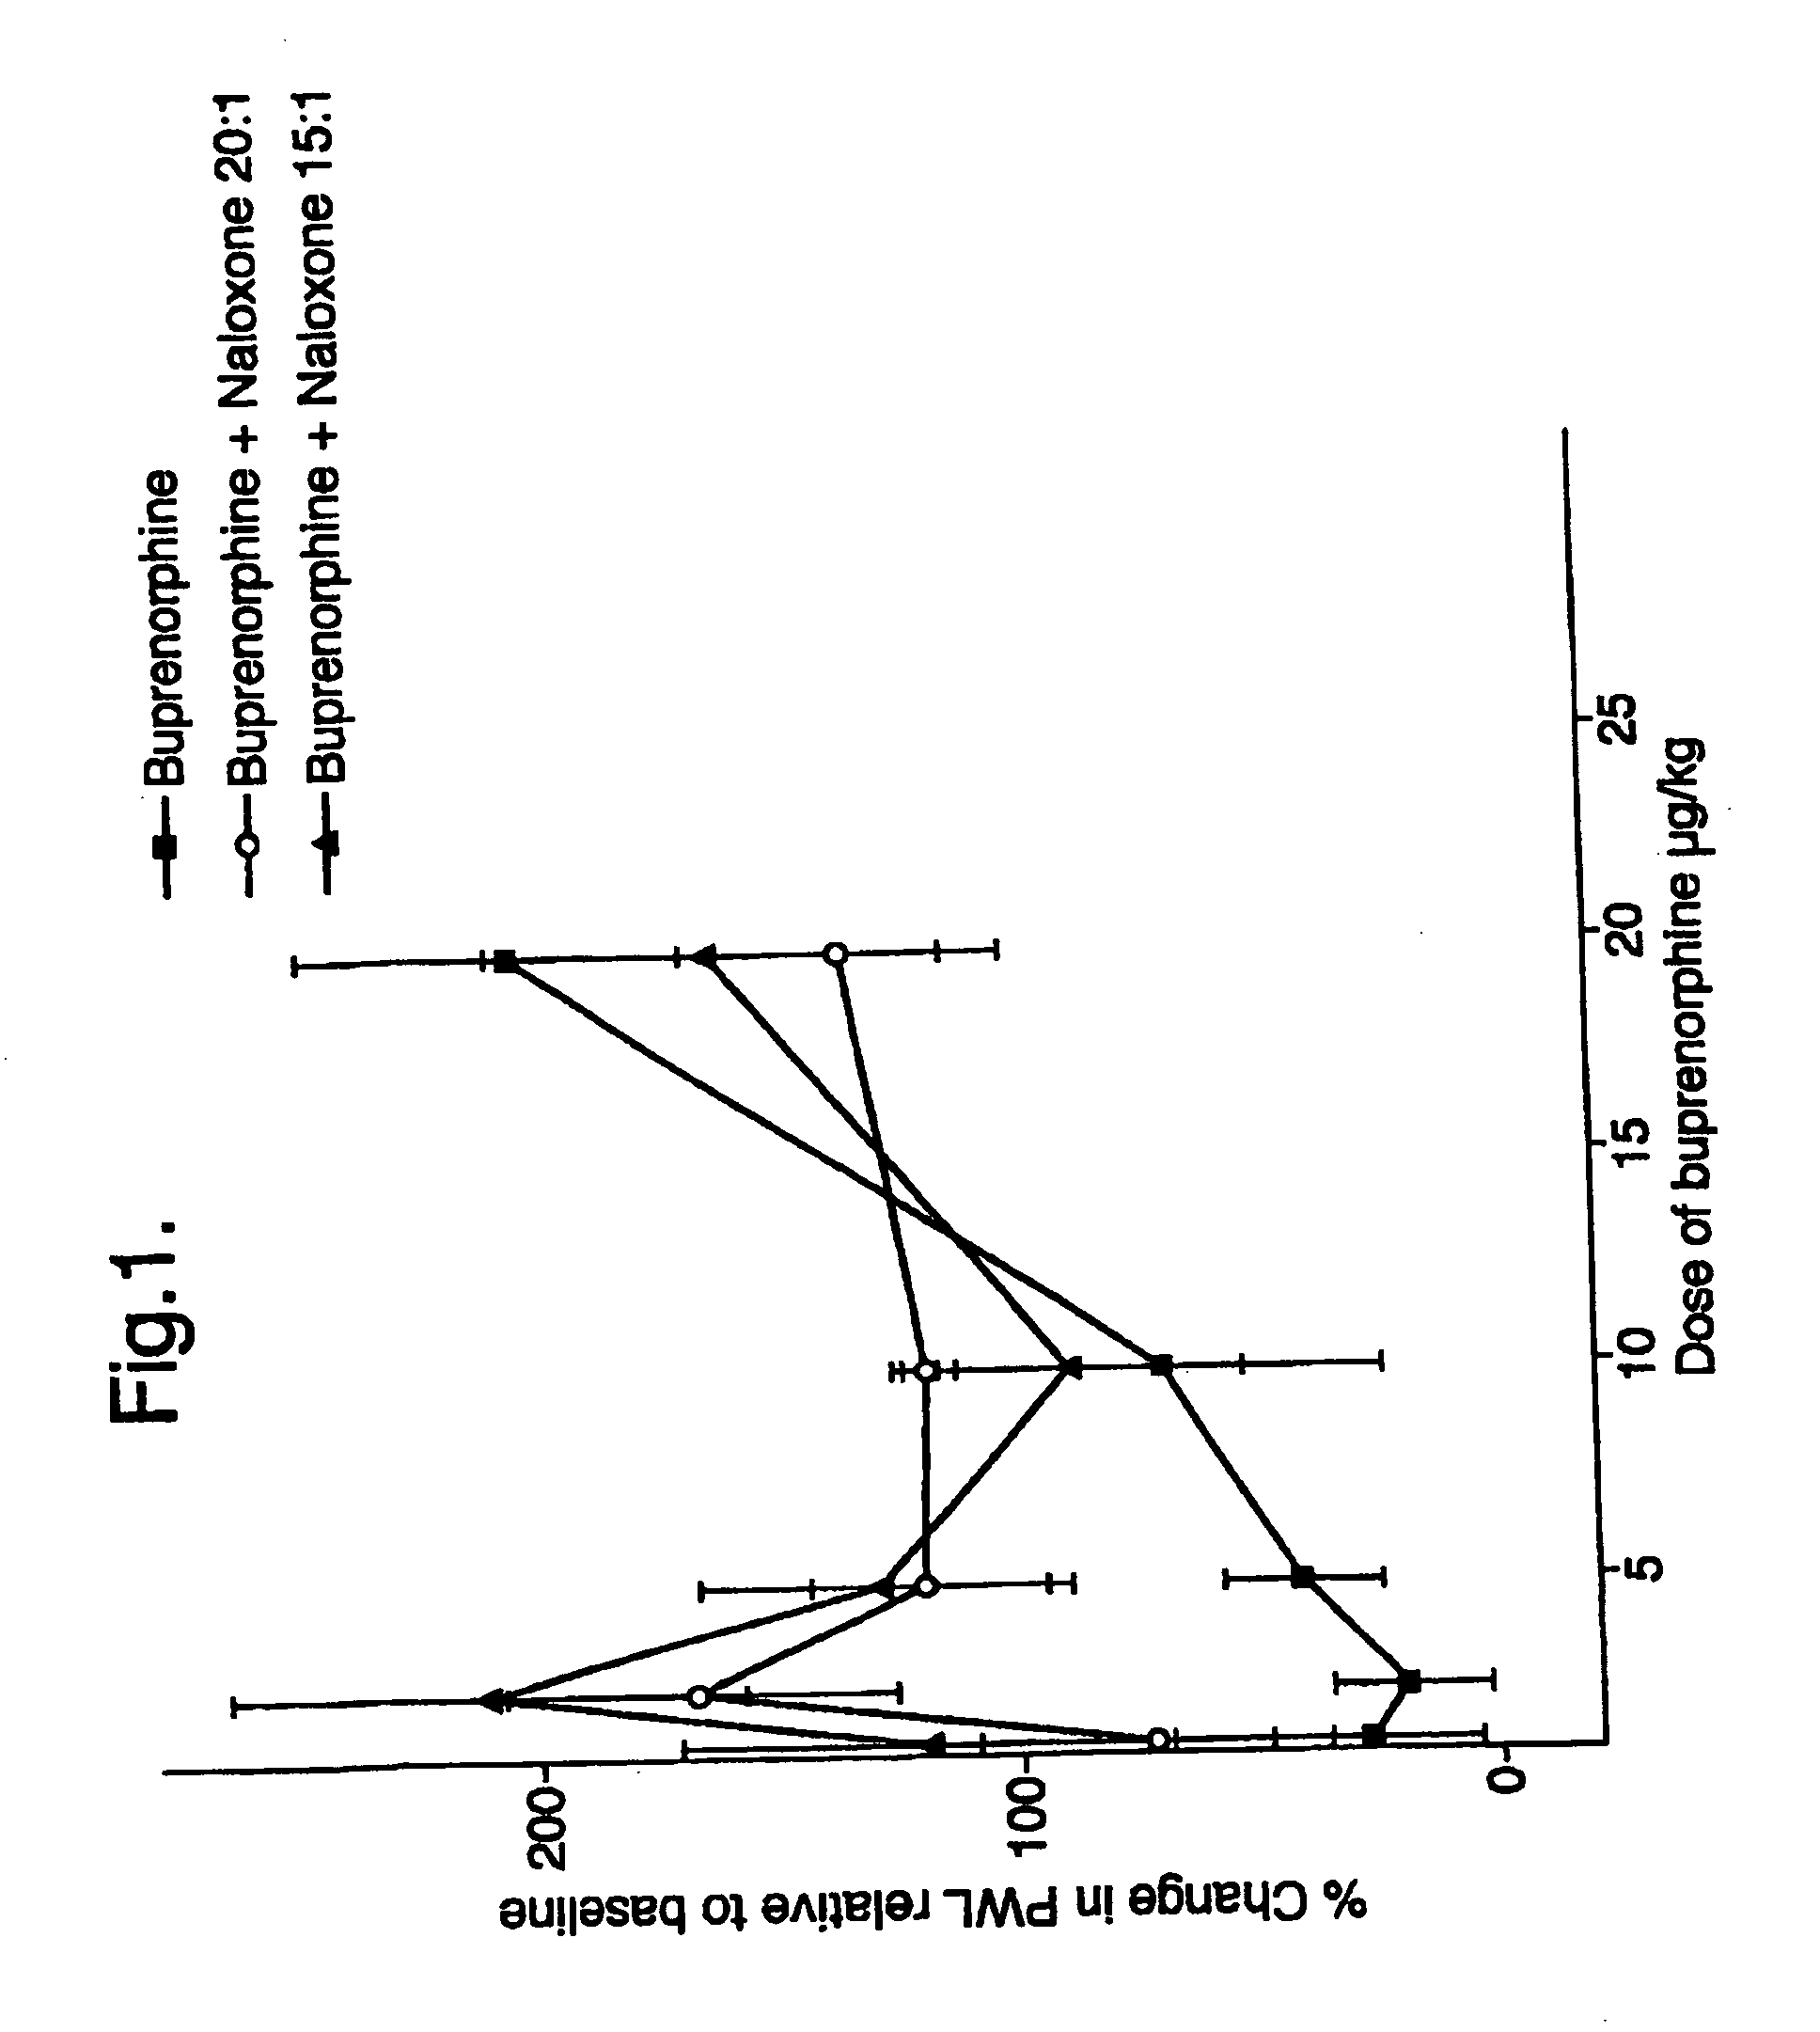 Analgesic compositions containing buprenorphine